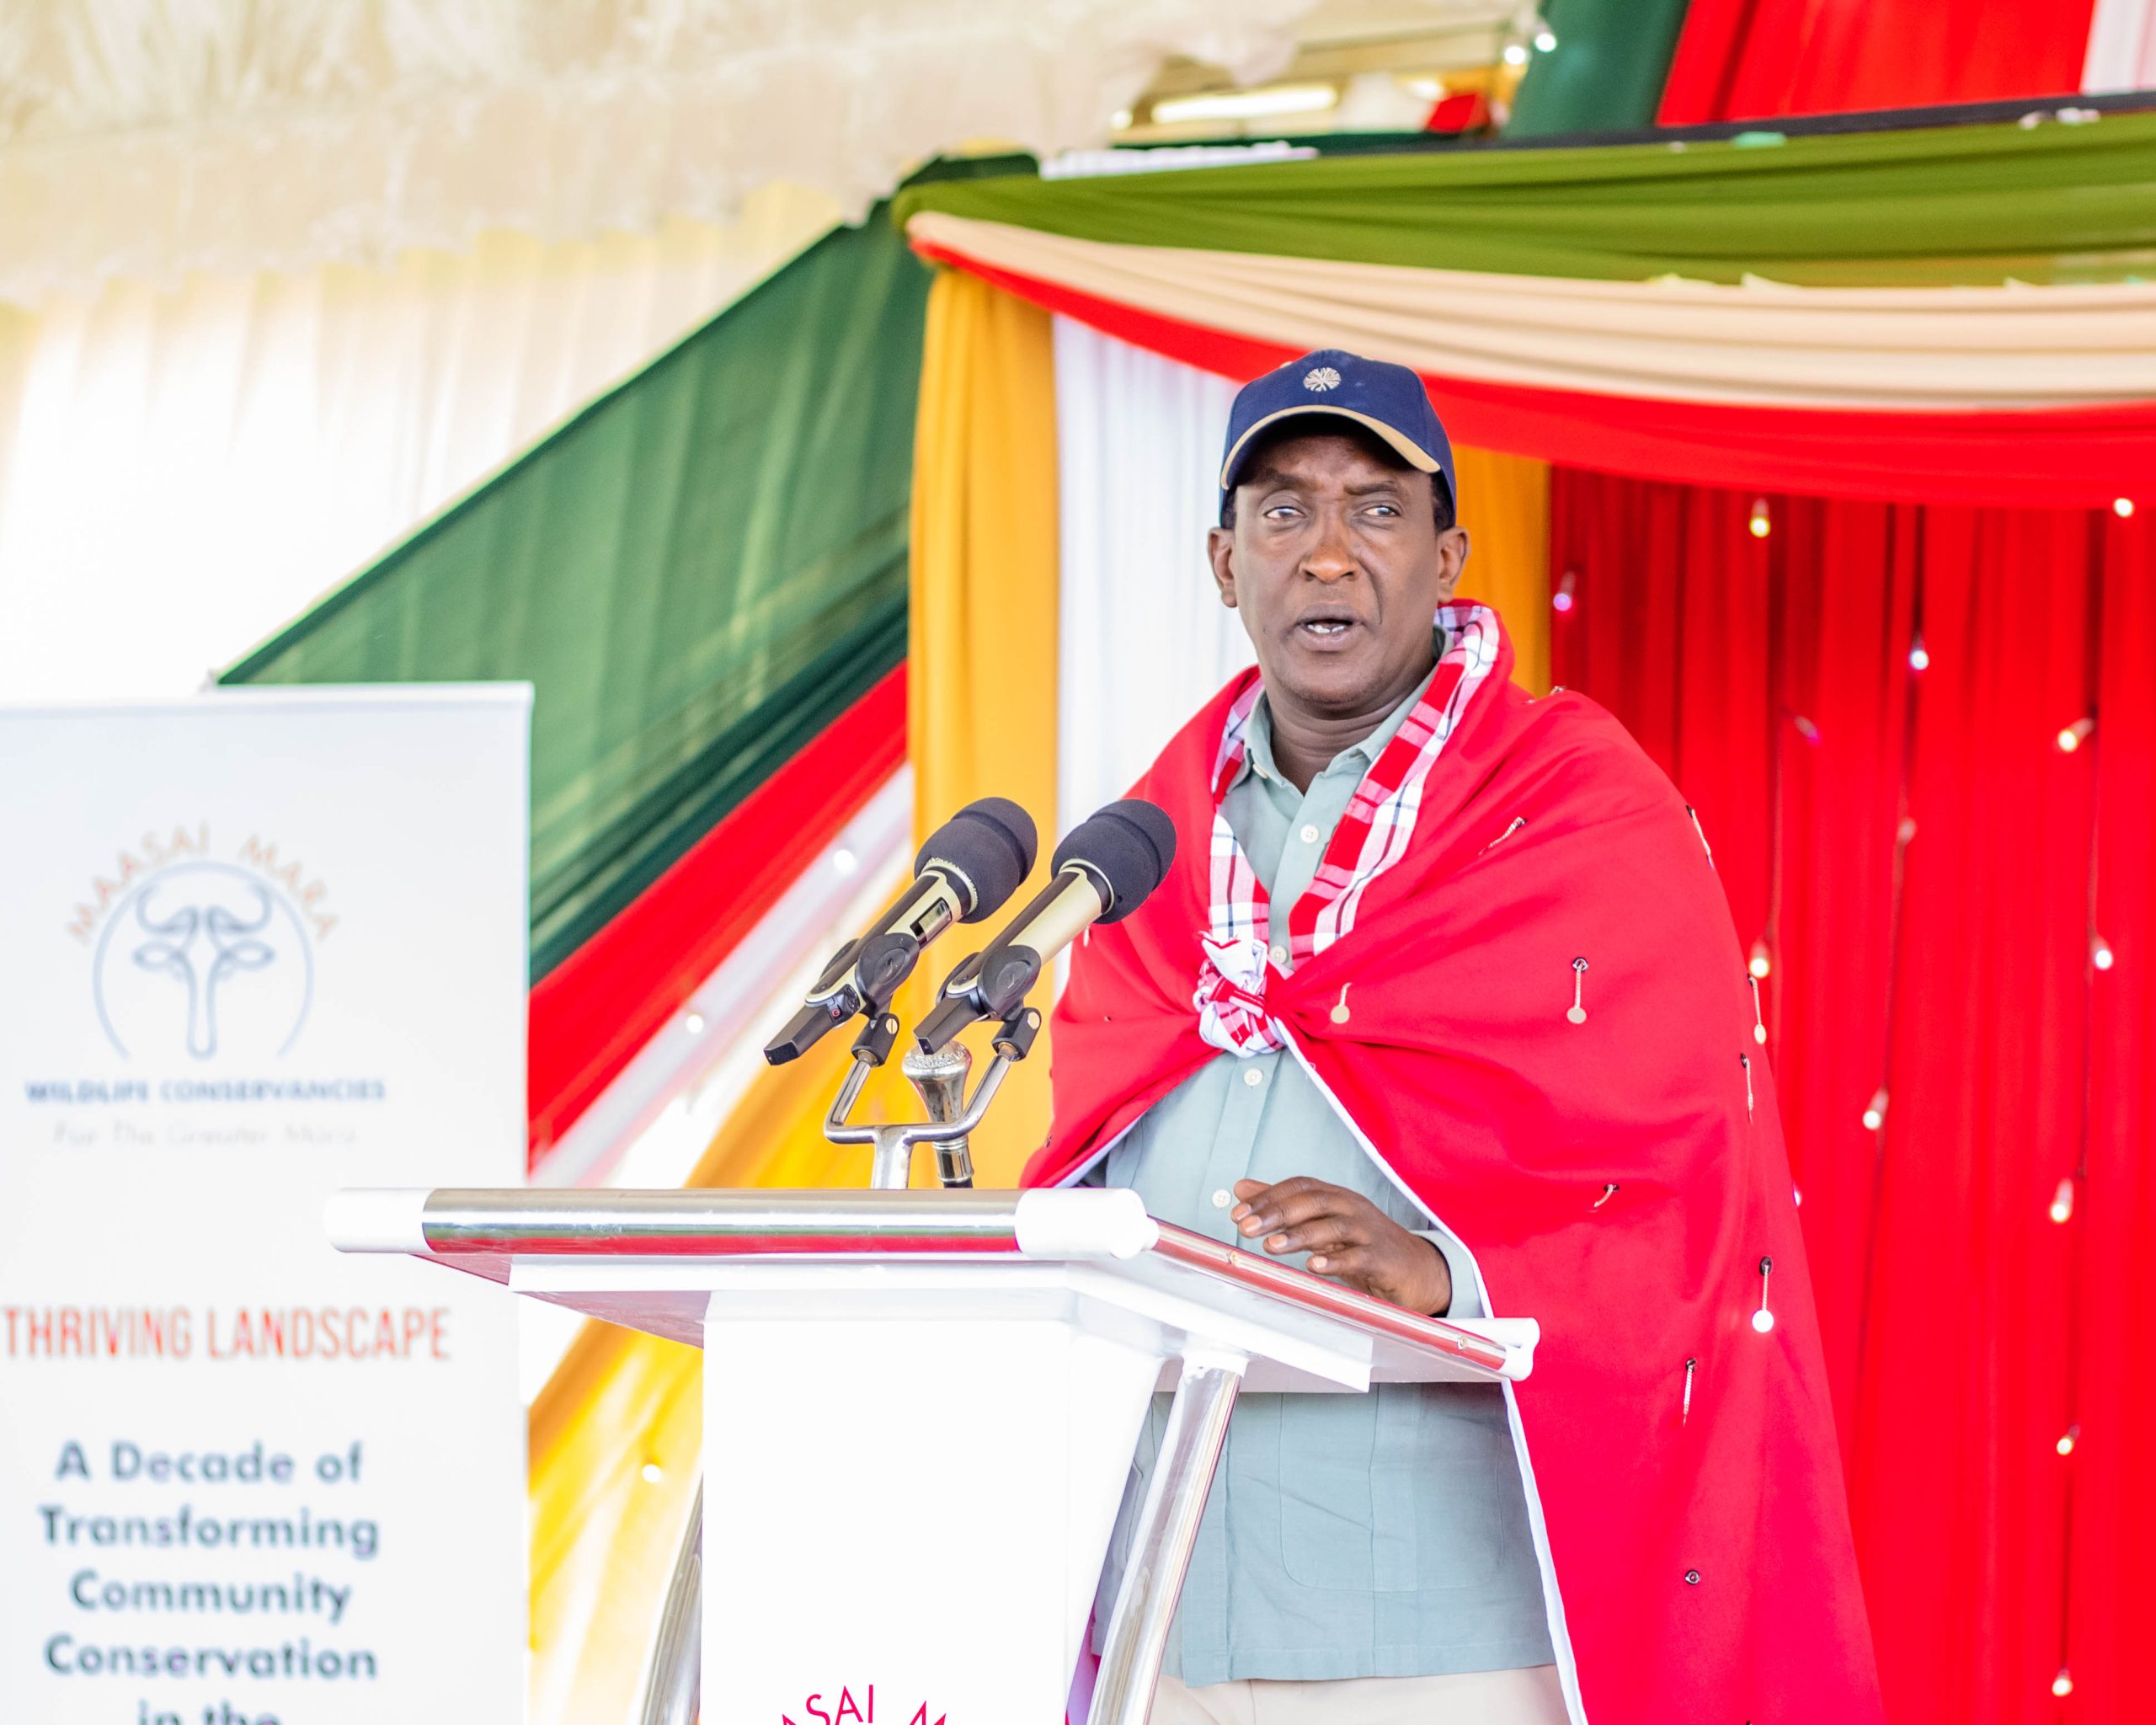 Narok Governor, H.E. Patrick Ole Ntutu, giving his remarks during the 10th anniversary of the Maasai Mara Wildlife Conservancies, in Narok County.